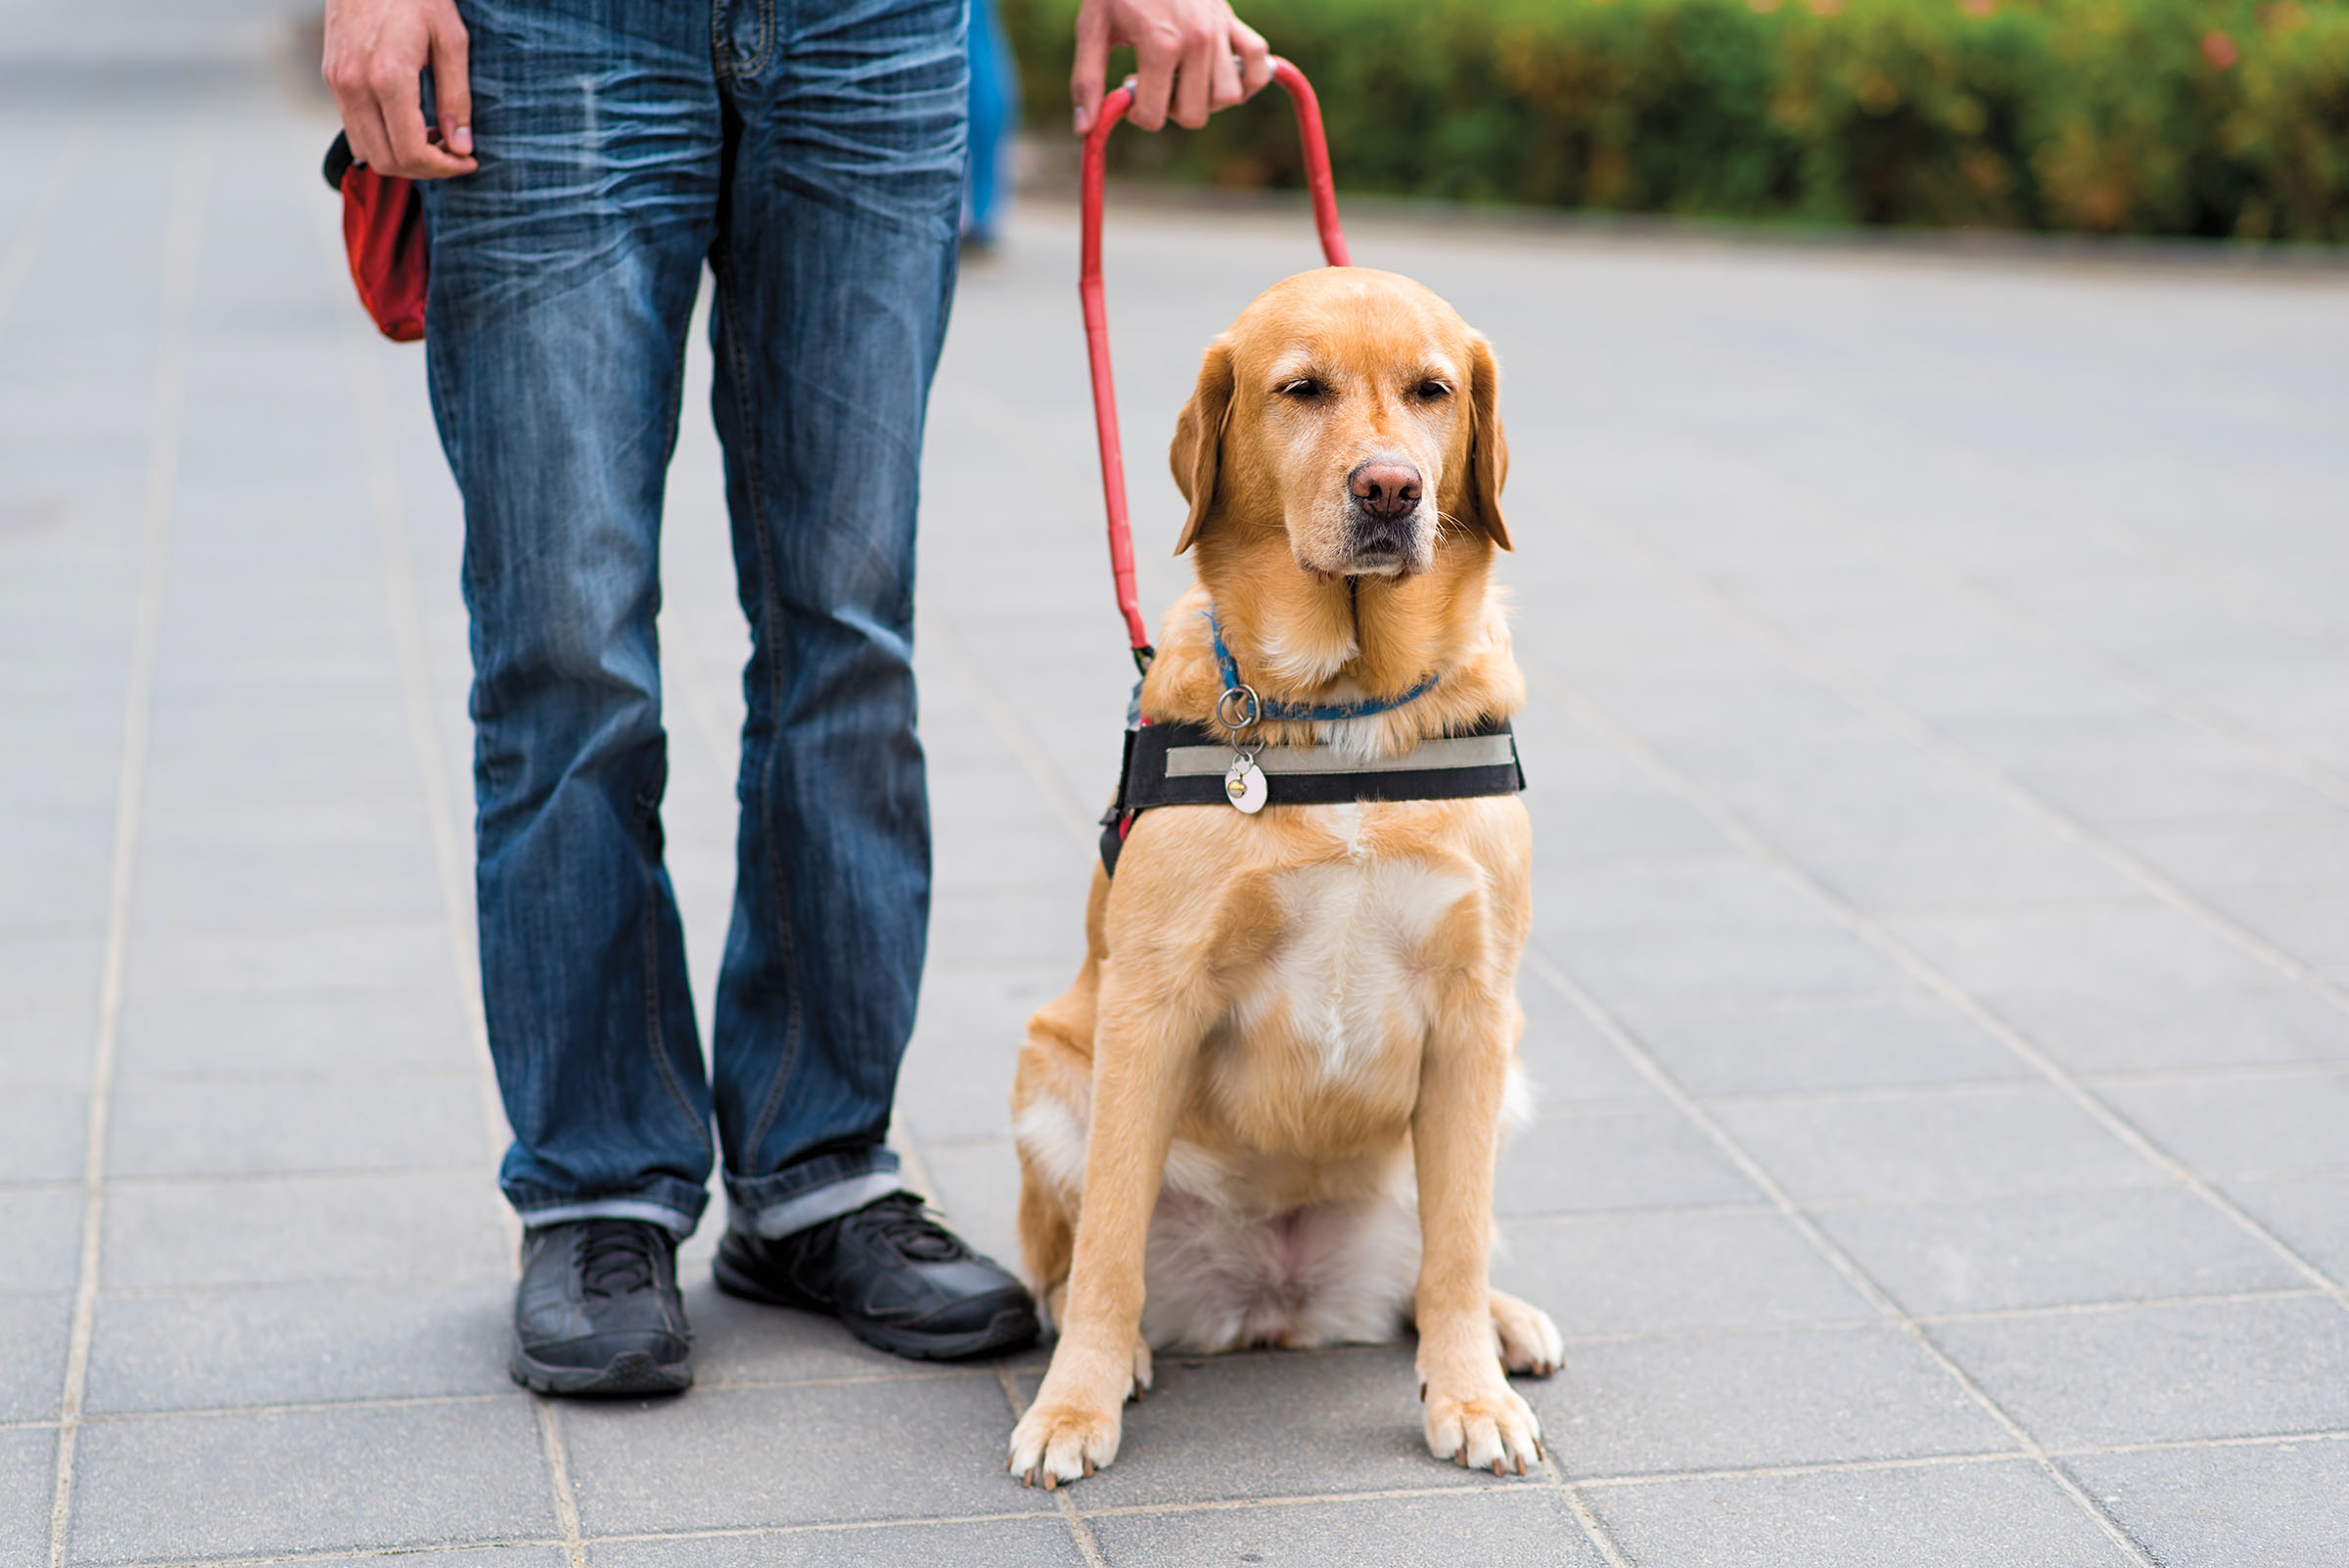 A golden-haired dog sits next to a person hodling them by a red harness